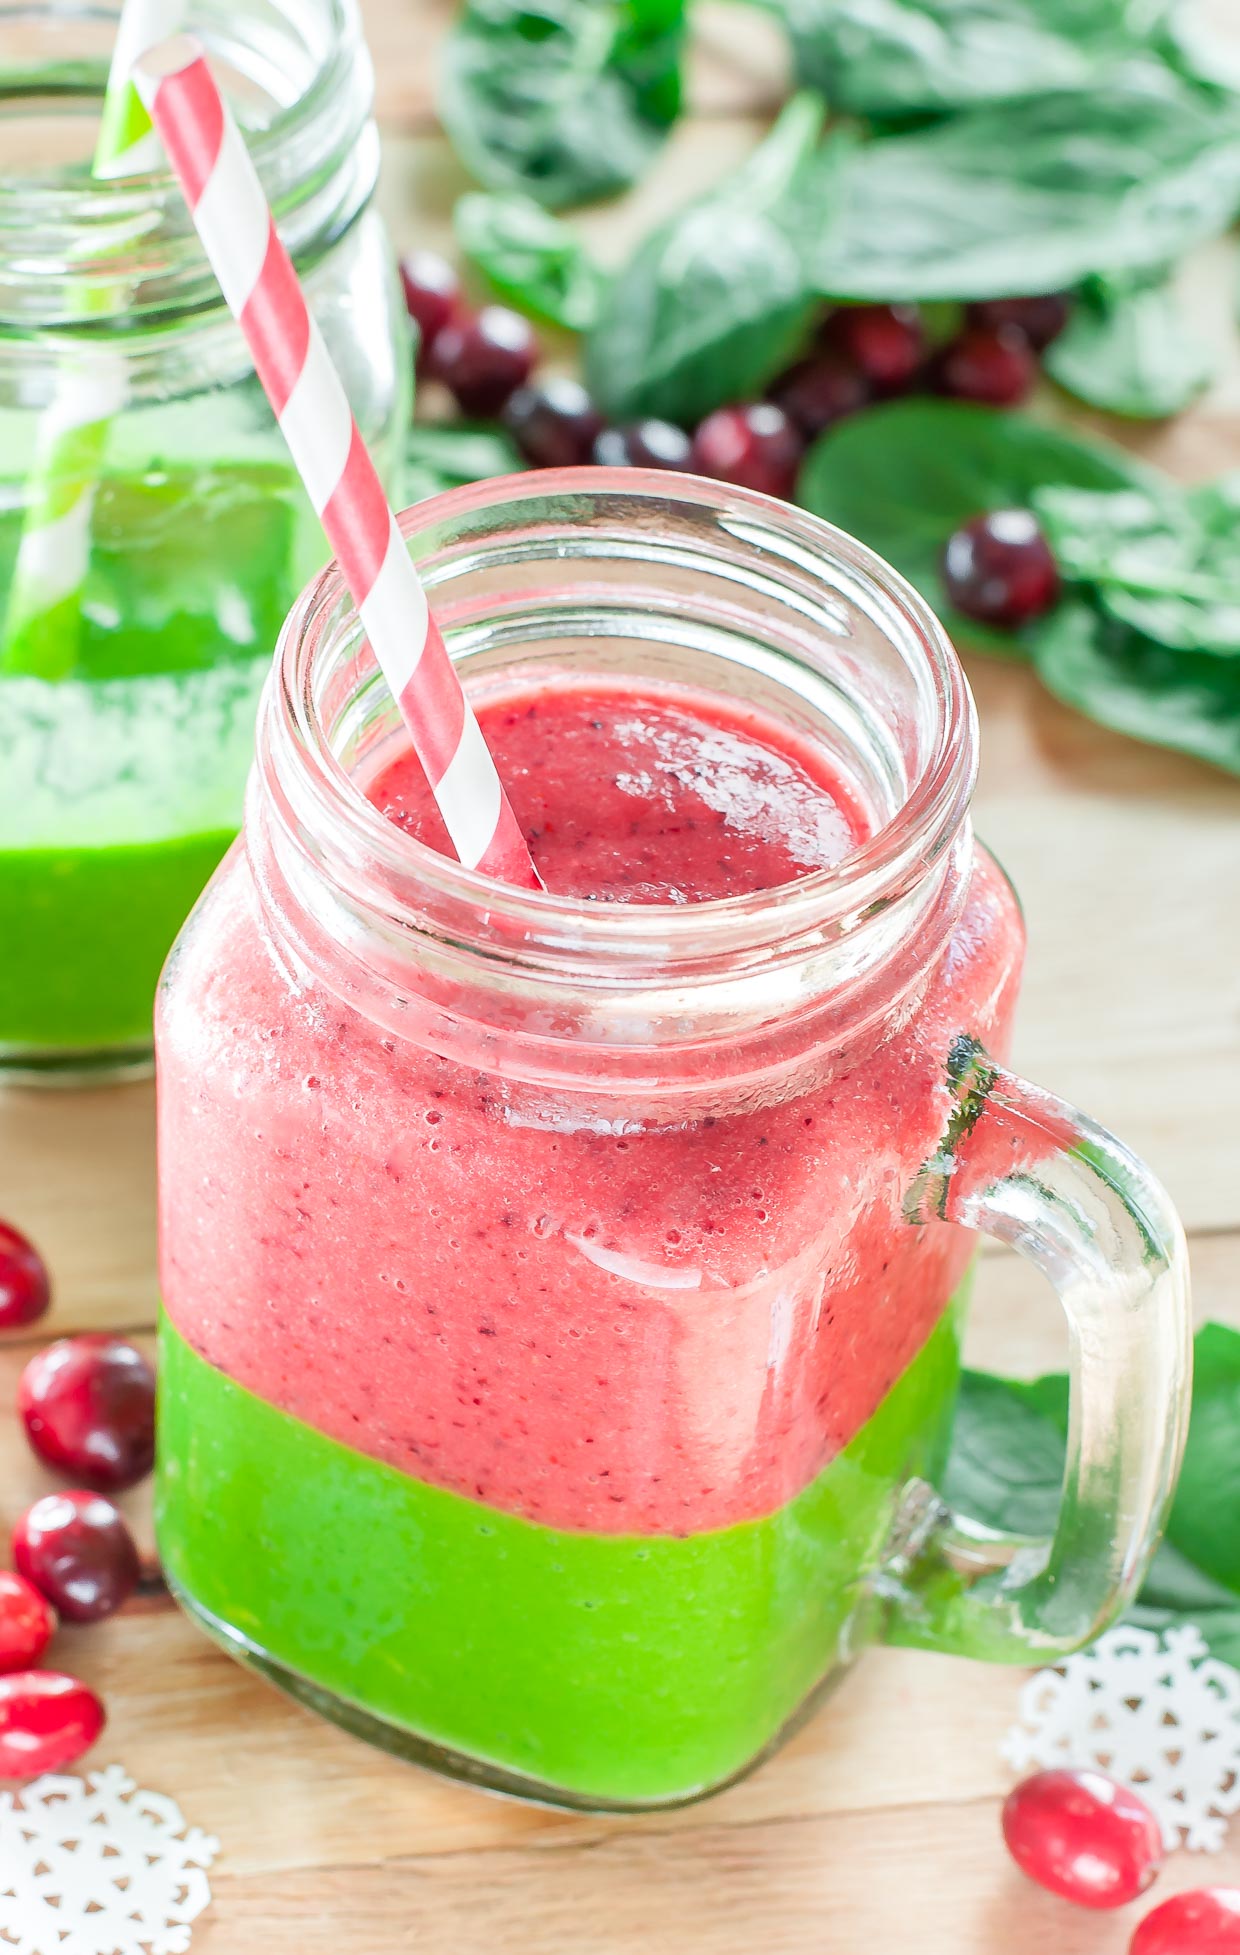 5 Delicious Smoothie Recipes That Will Keep You Snatched